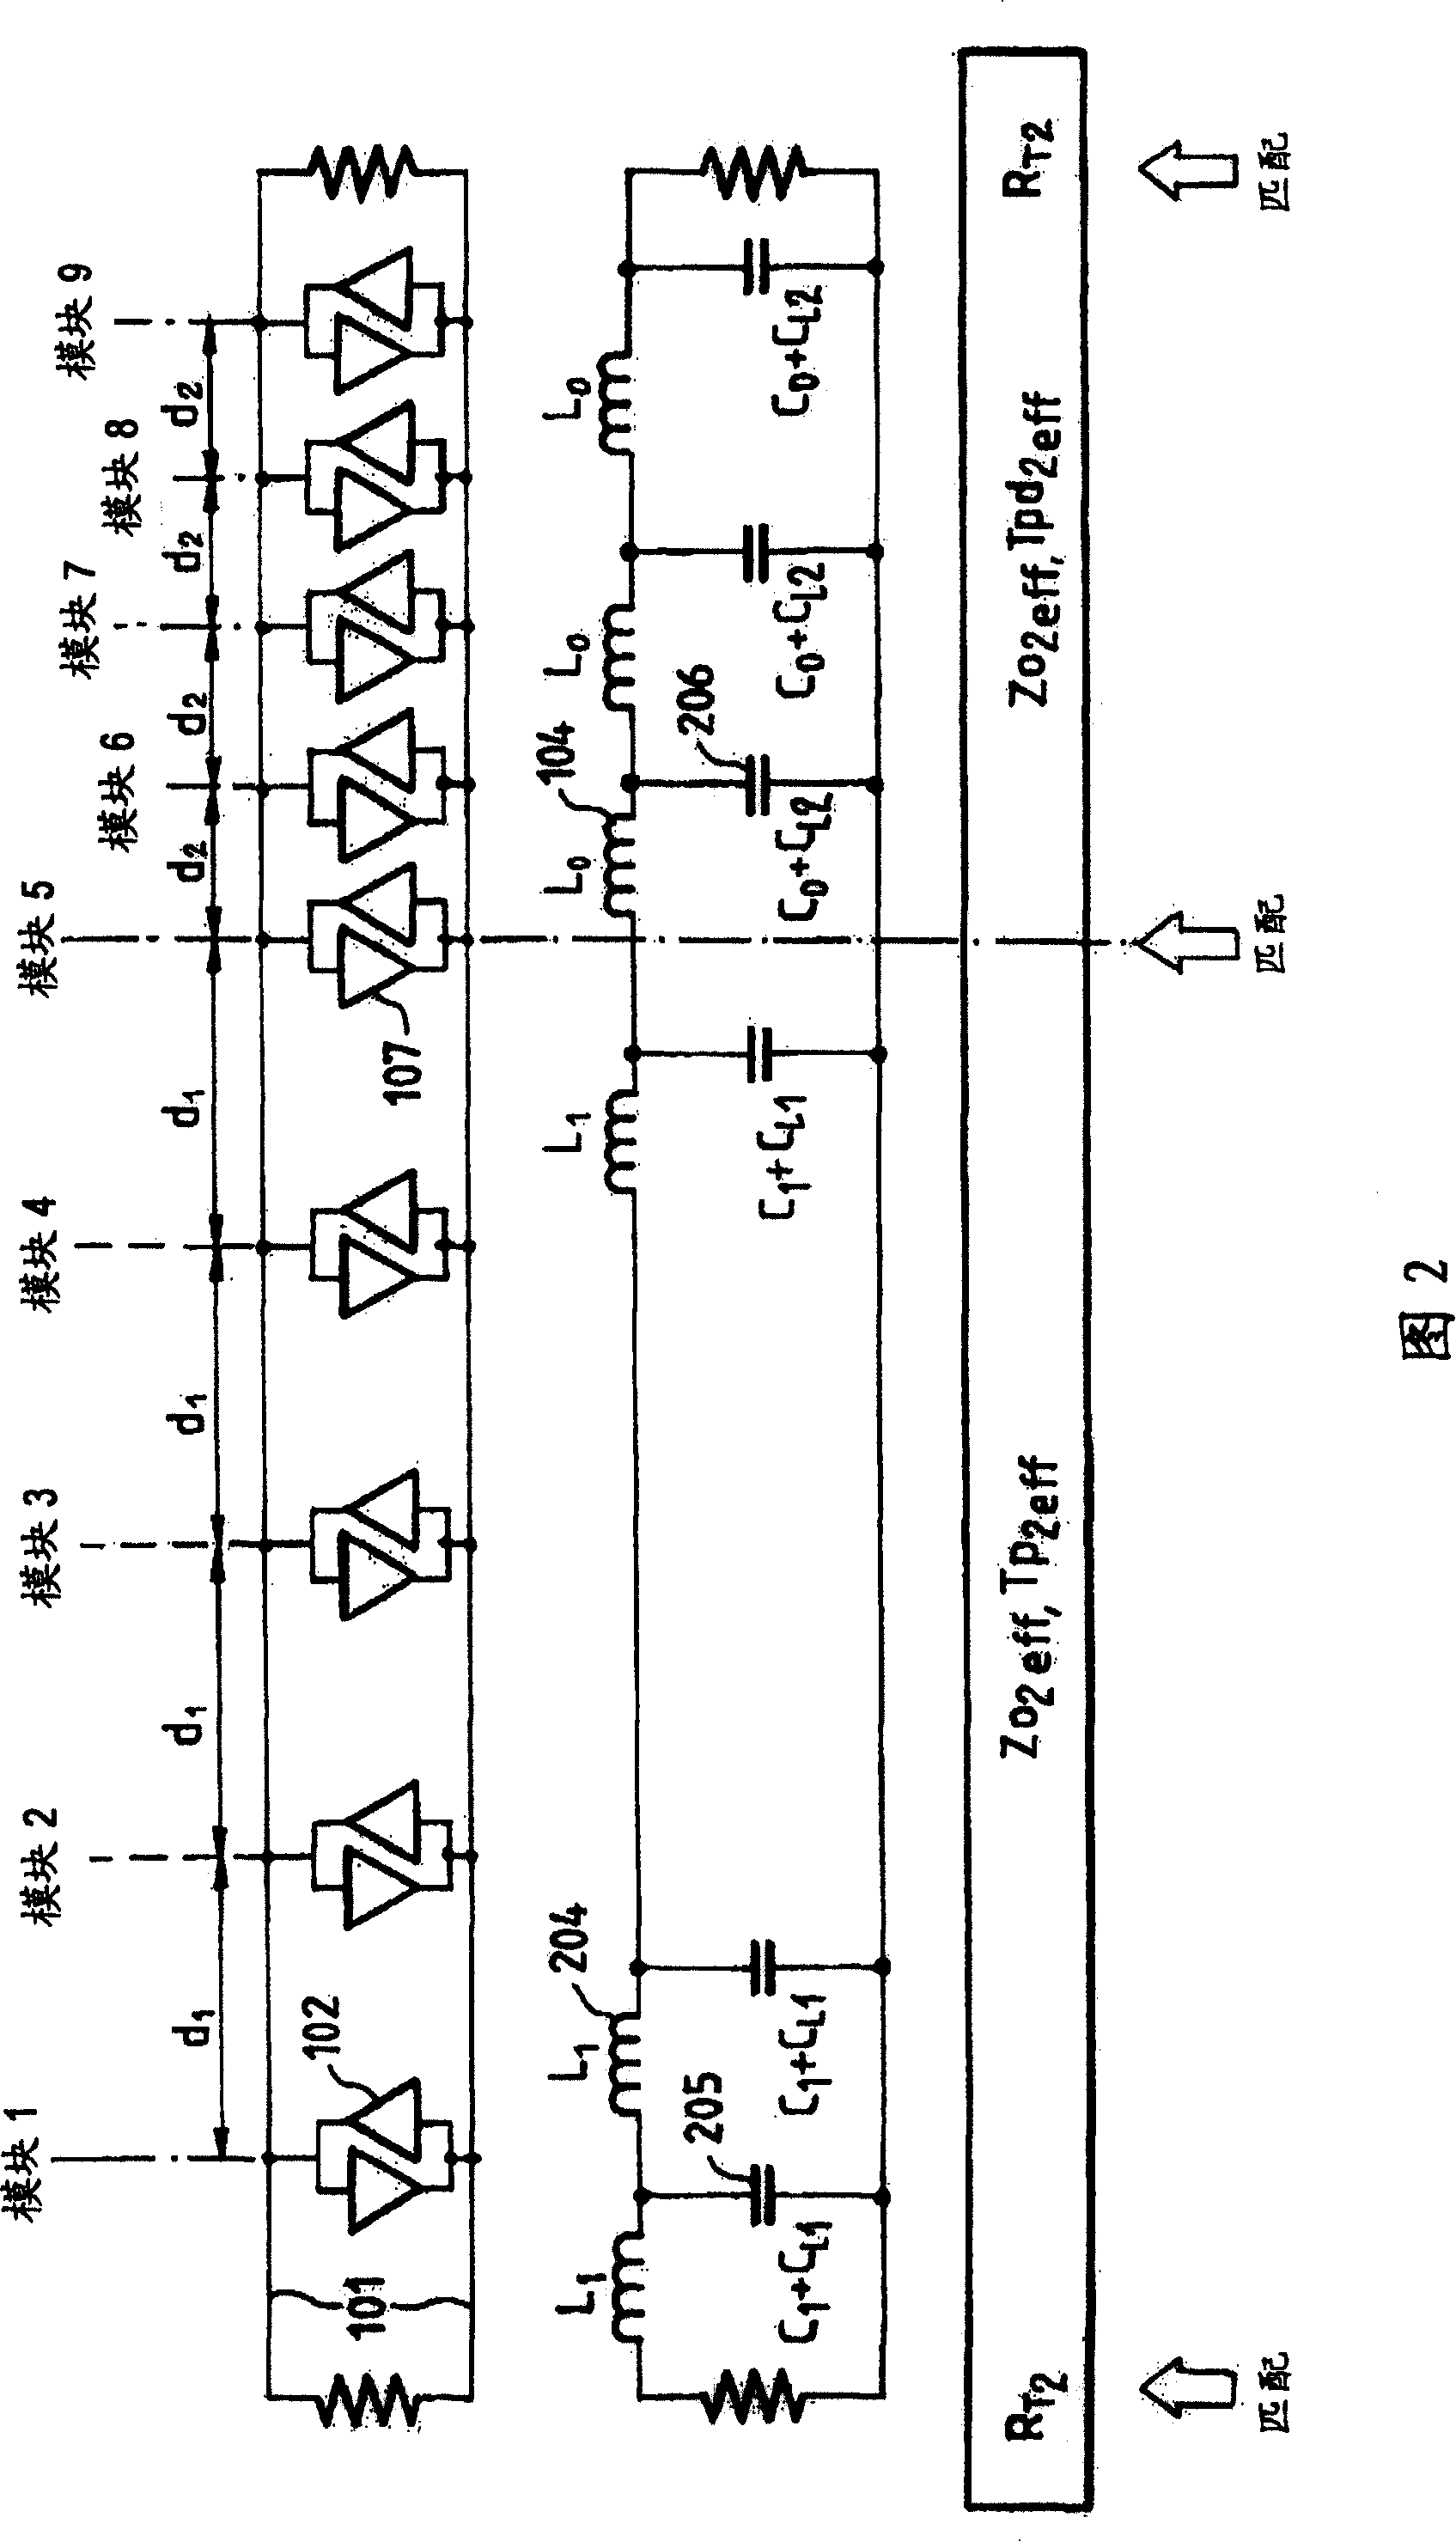 Bus type connection system for backplanes